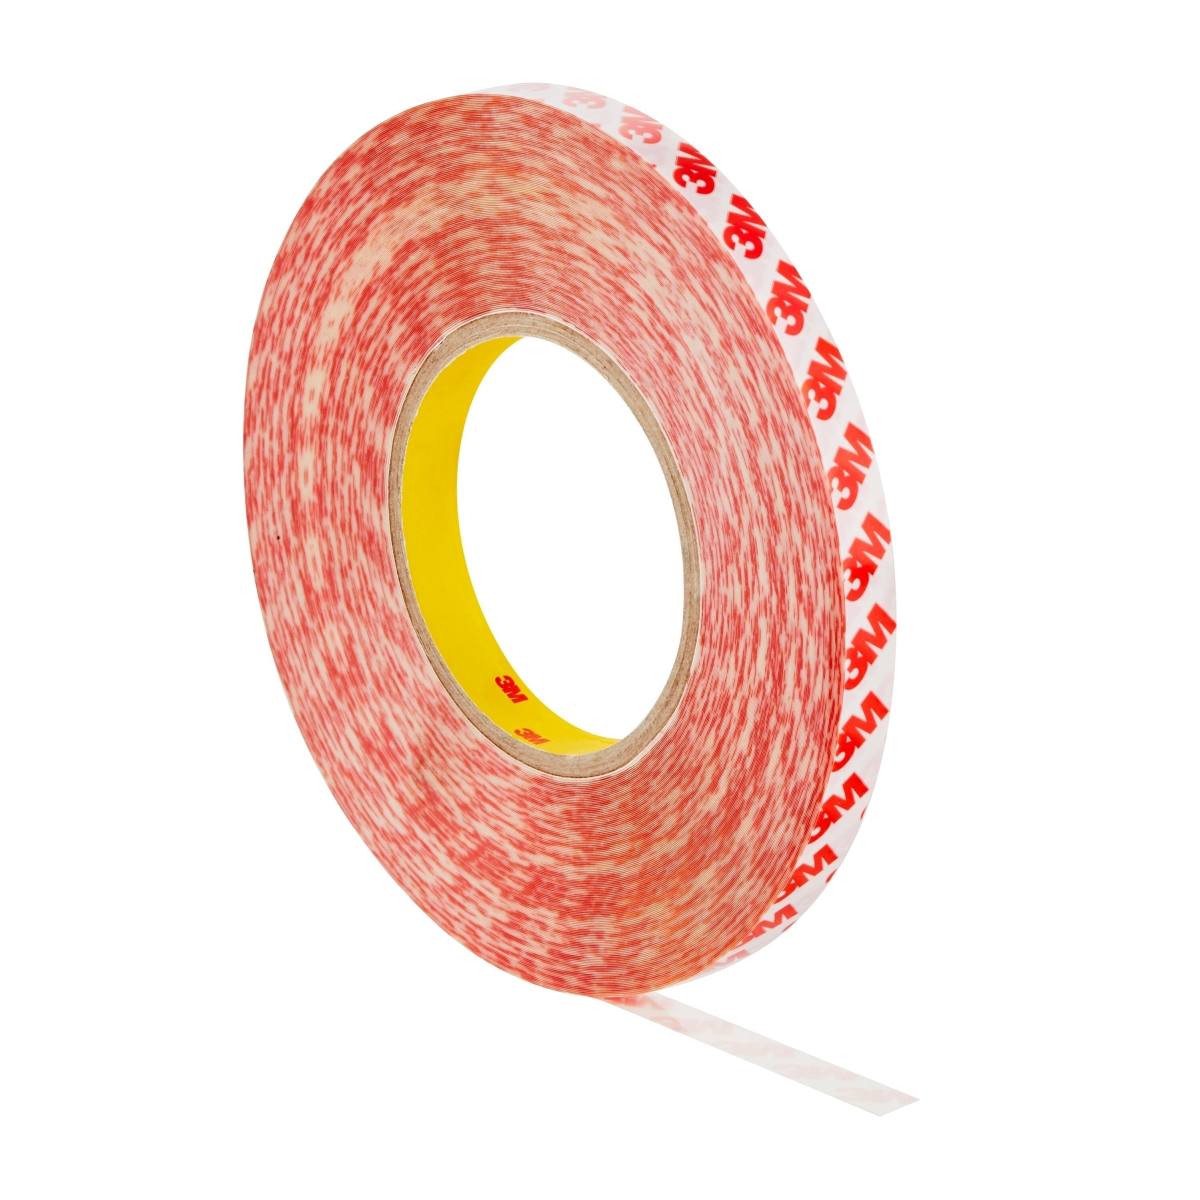 3M Double-sided adhesive tape with polyester backing GPT-020P, transparent, 9 mm x 50 m, 0.202 mm